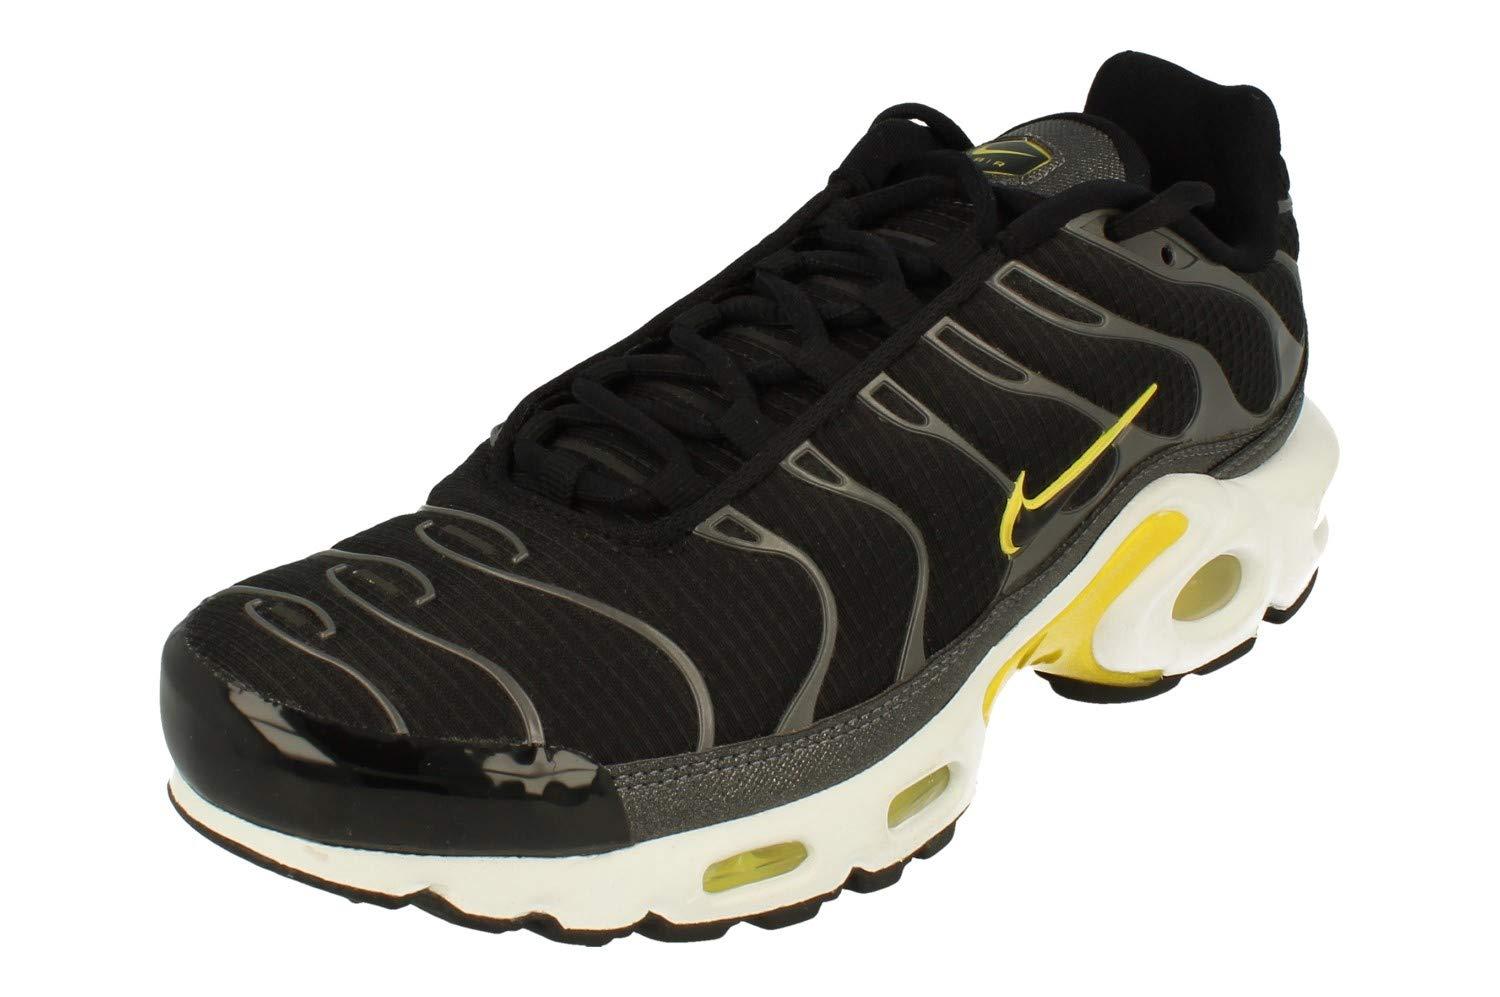 Nike Synthetic Original Air Max Plus Tunned 1 Tn Trainers Cn0142 001 (db20)  (4) - Save 30% - Lyst